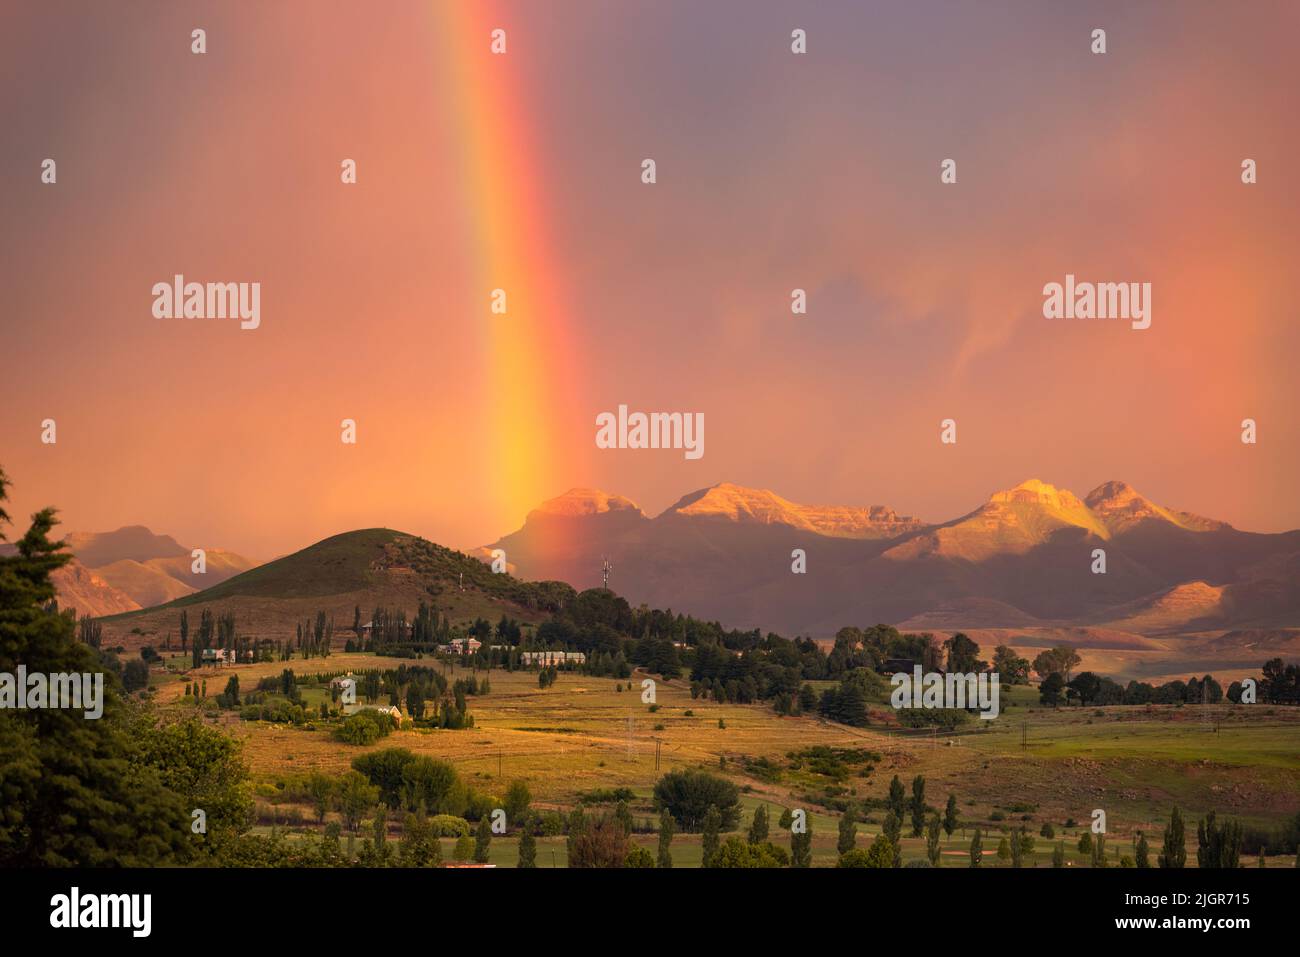 View of a rainbow at sunset against a backdrop of mountains in the town of Clarens, South Africa Stock Photo